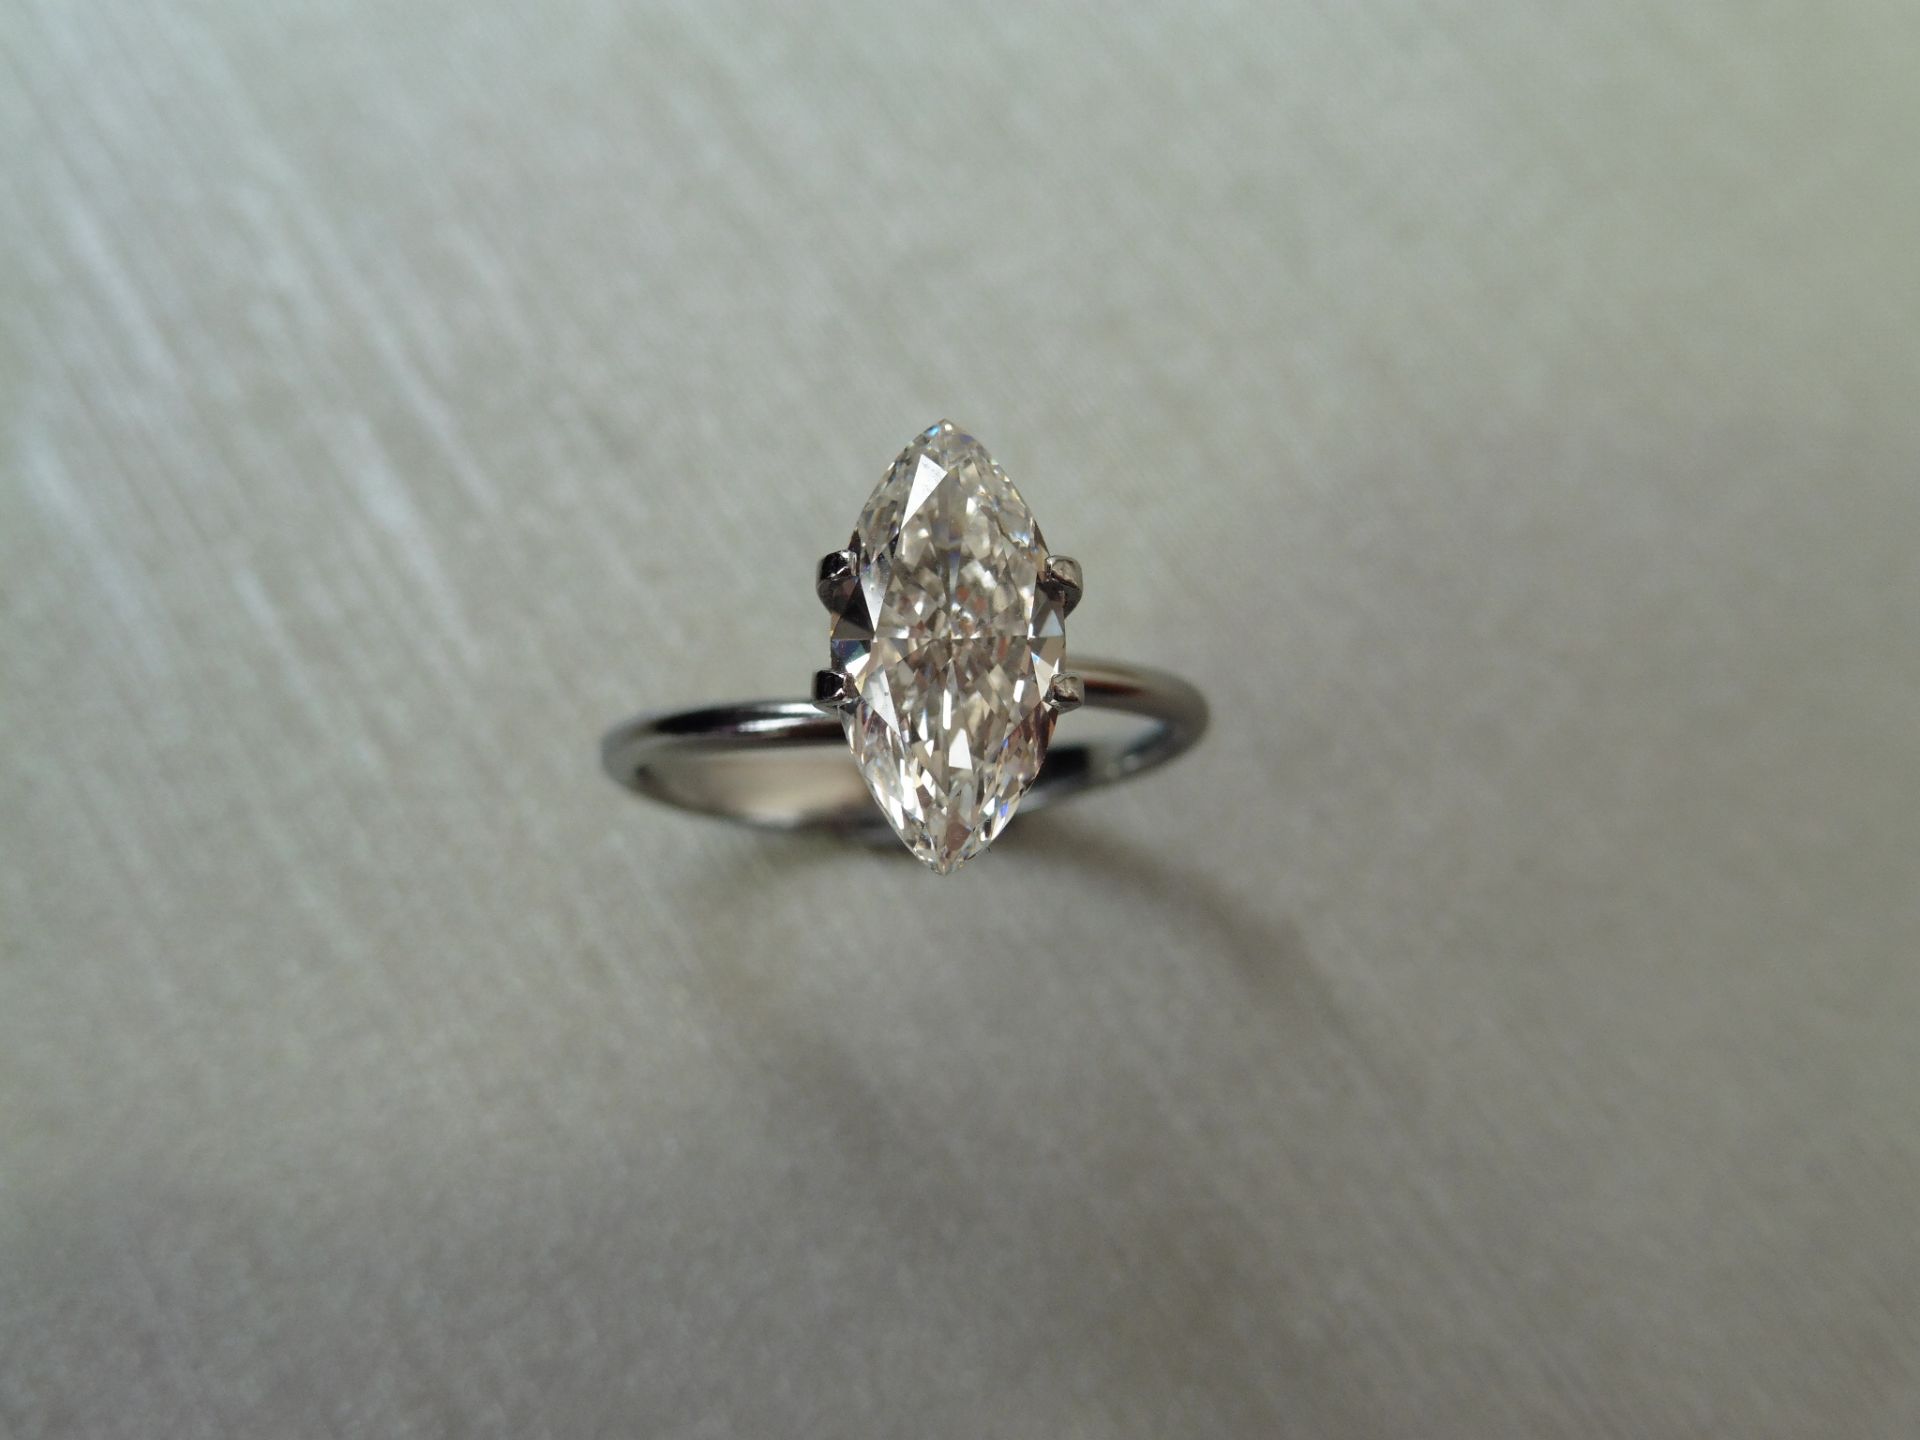 1.73ct single marquise cut diamond. Measurements 12.90 x 6.44 x 3.32mm. F colour and SI2 clarity.